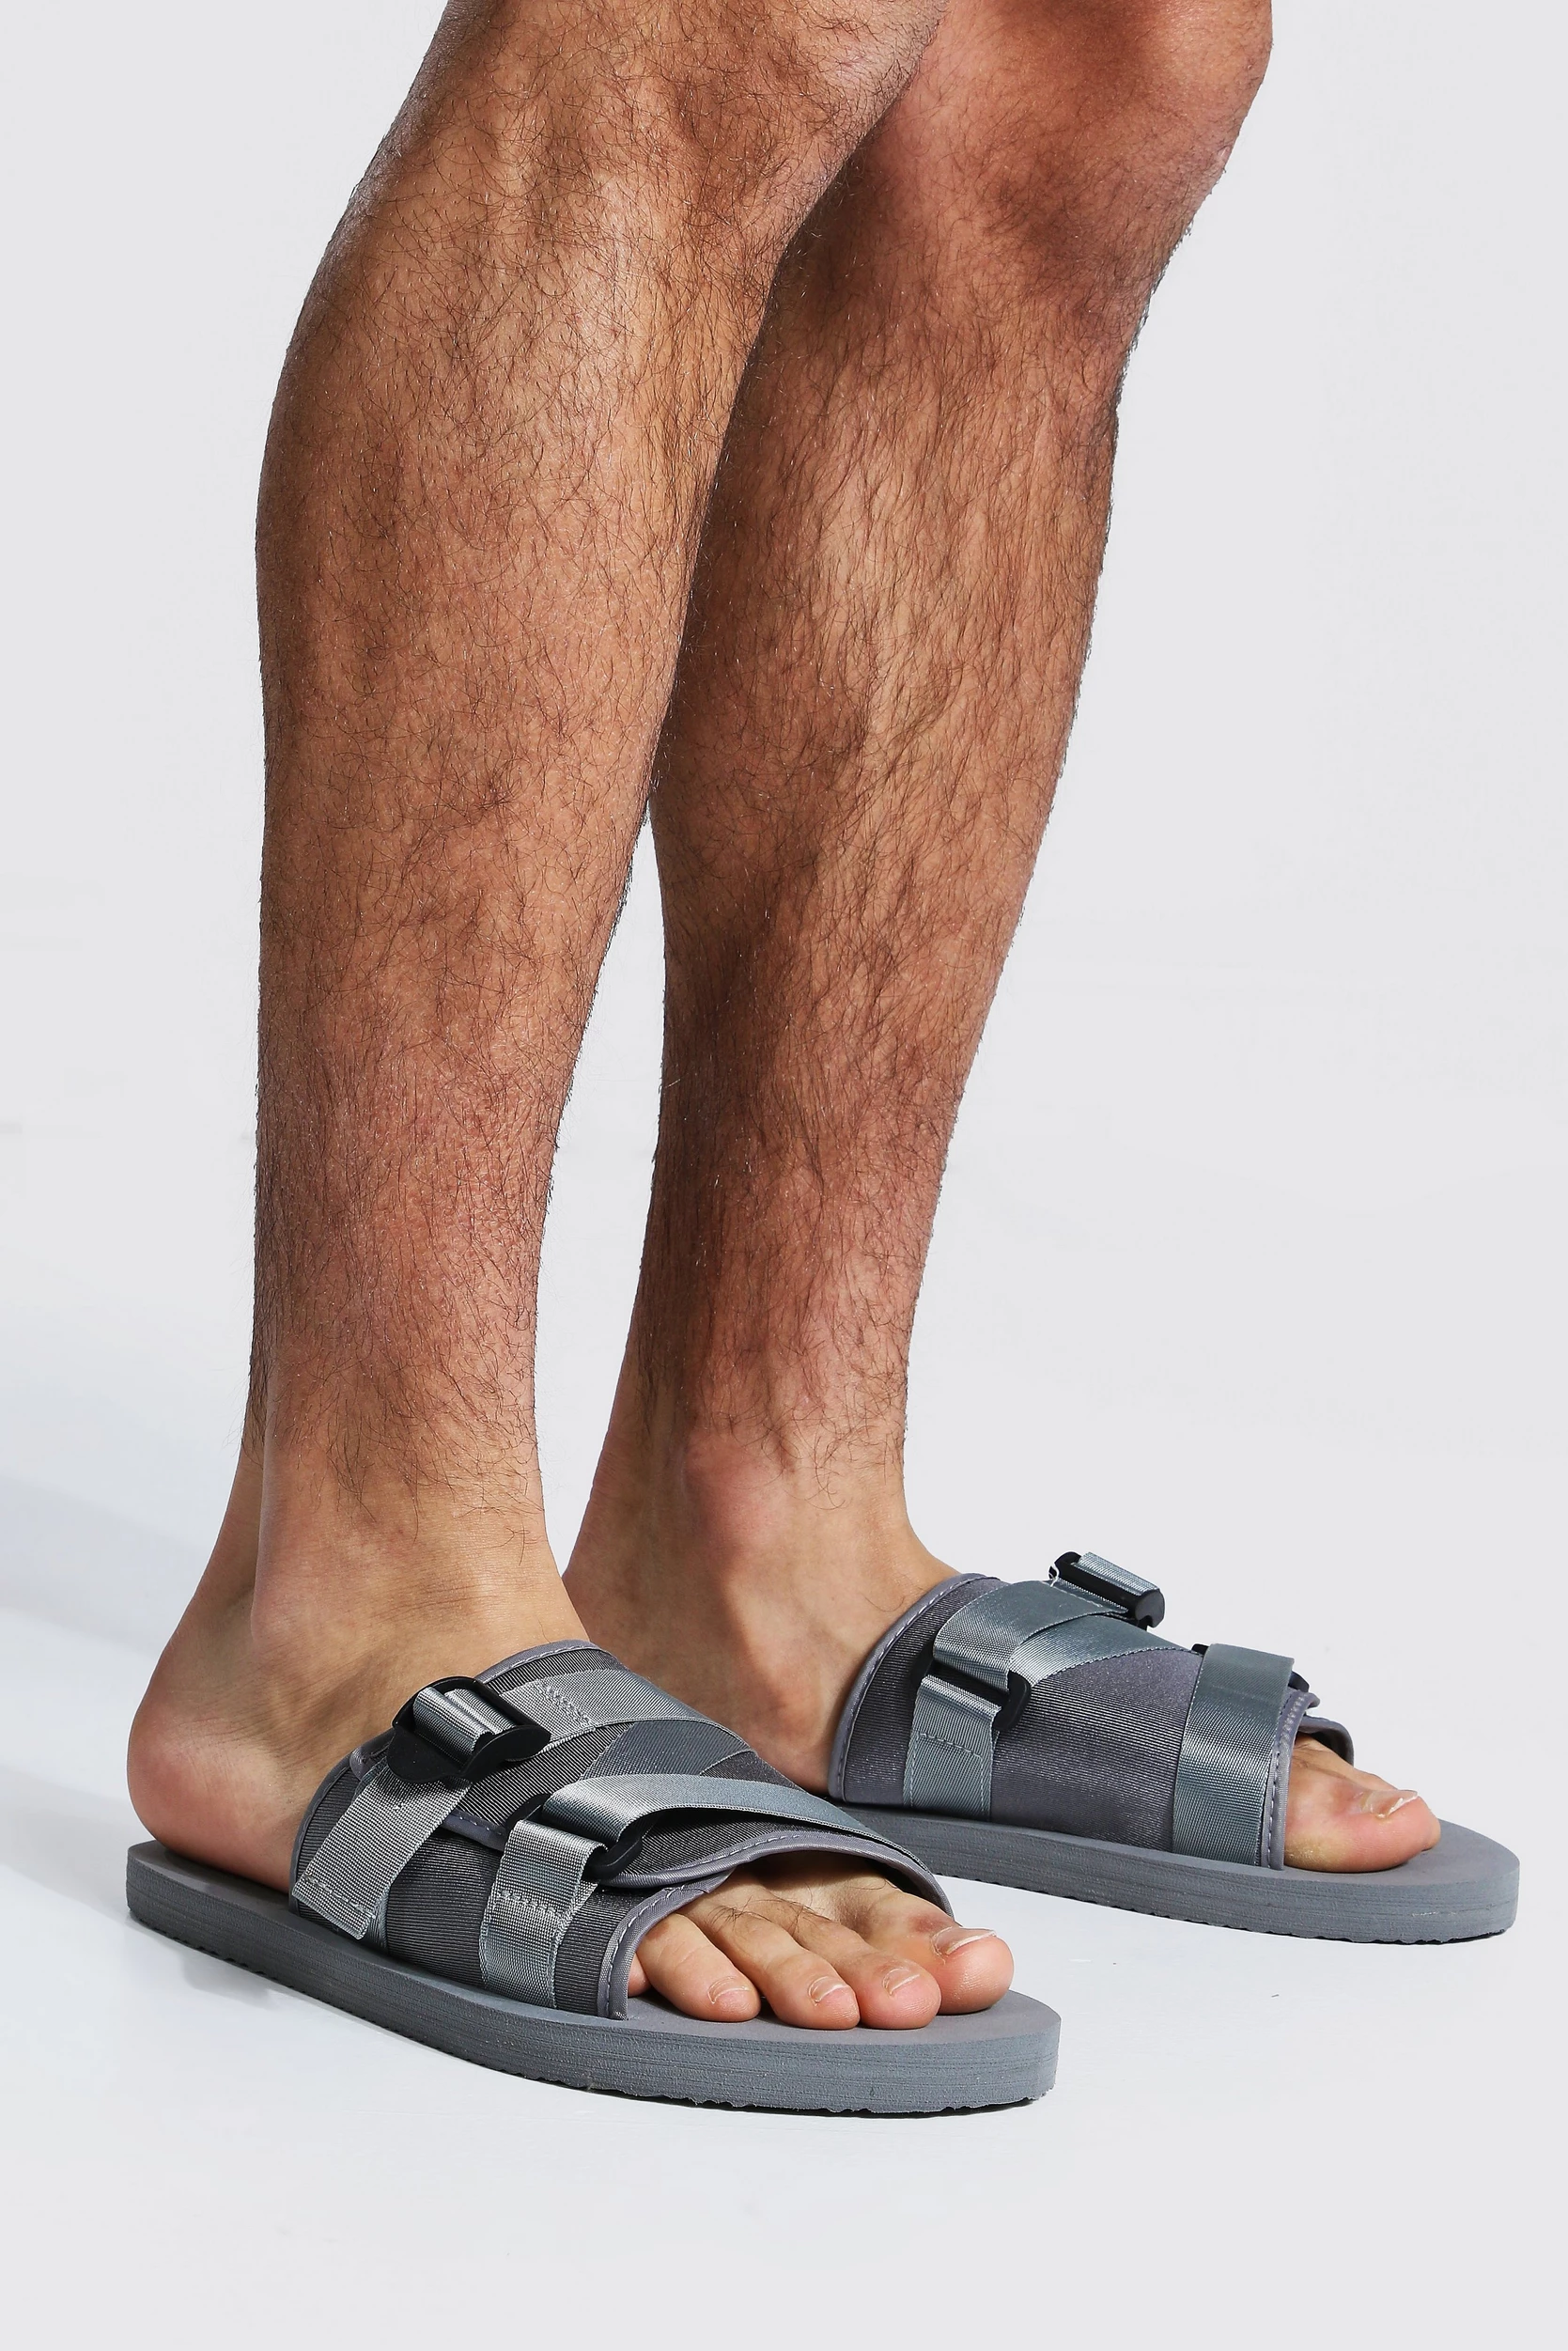 boohooman.com | Padded Strap Front Sliders